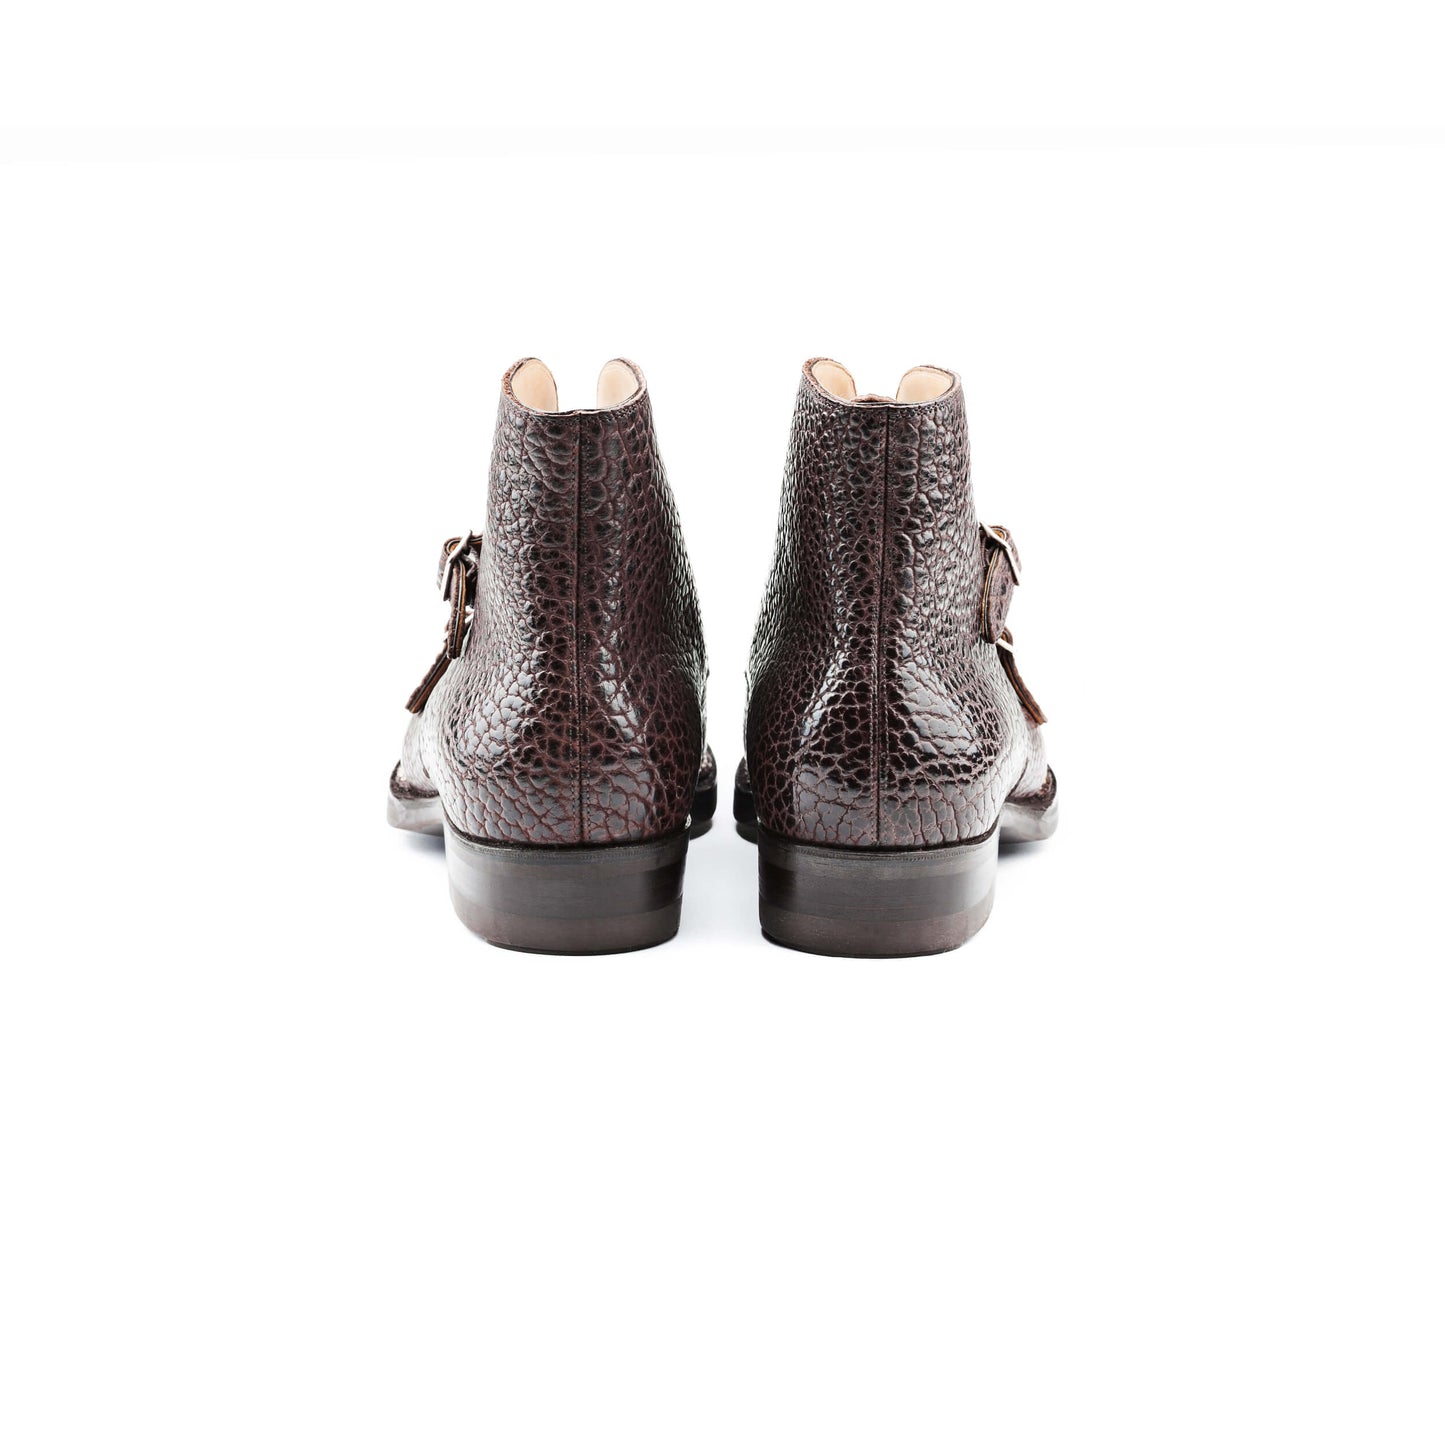 Double buckle Monk boots in dark brown Bison leather